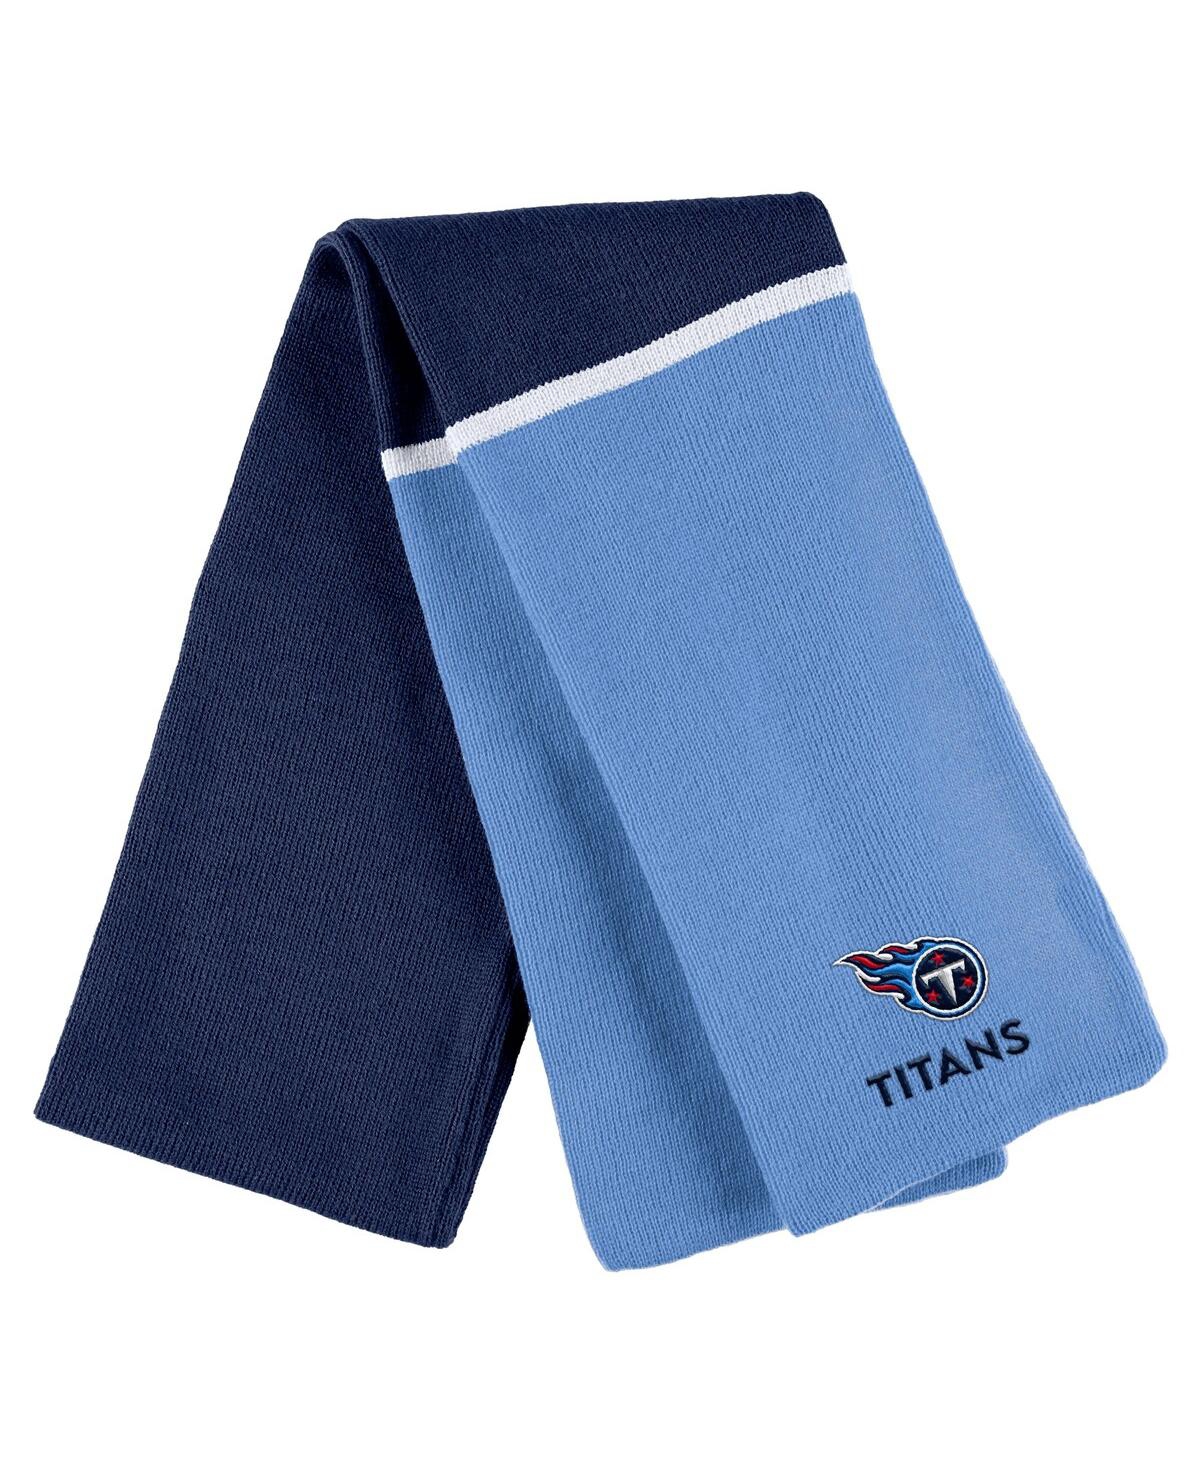 Shop Wear By Erin Andrews Women's  Navy Tennessee Titans Colorblock Cuffed Knit Hat With Pom And Scarf Set